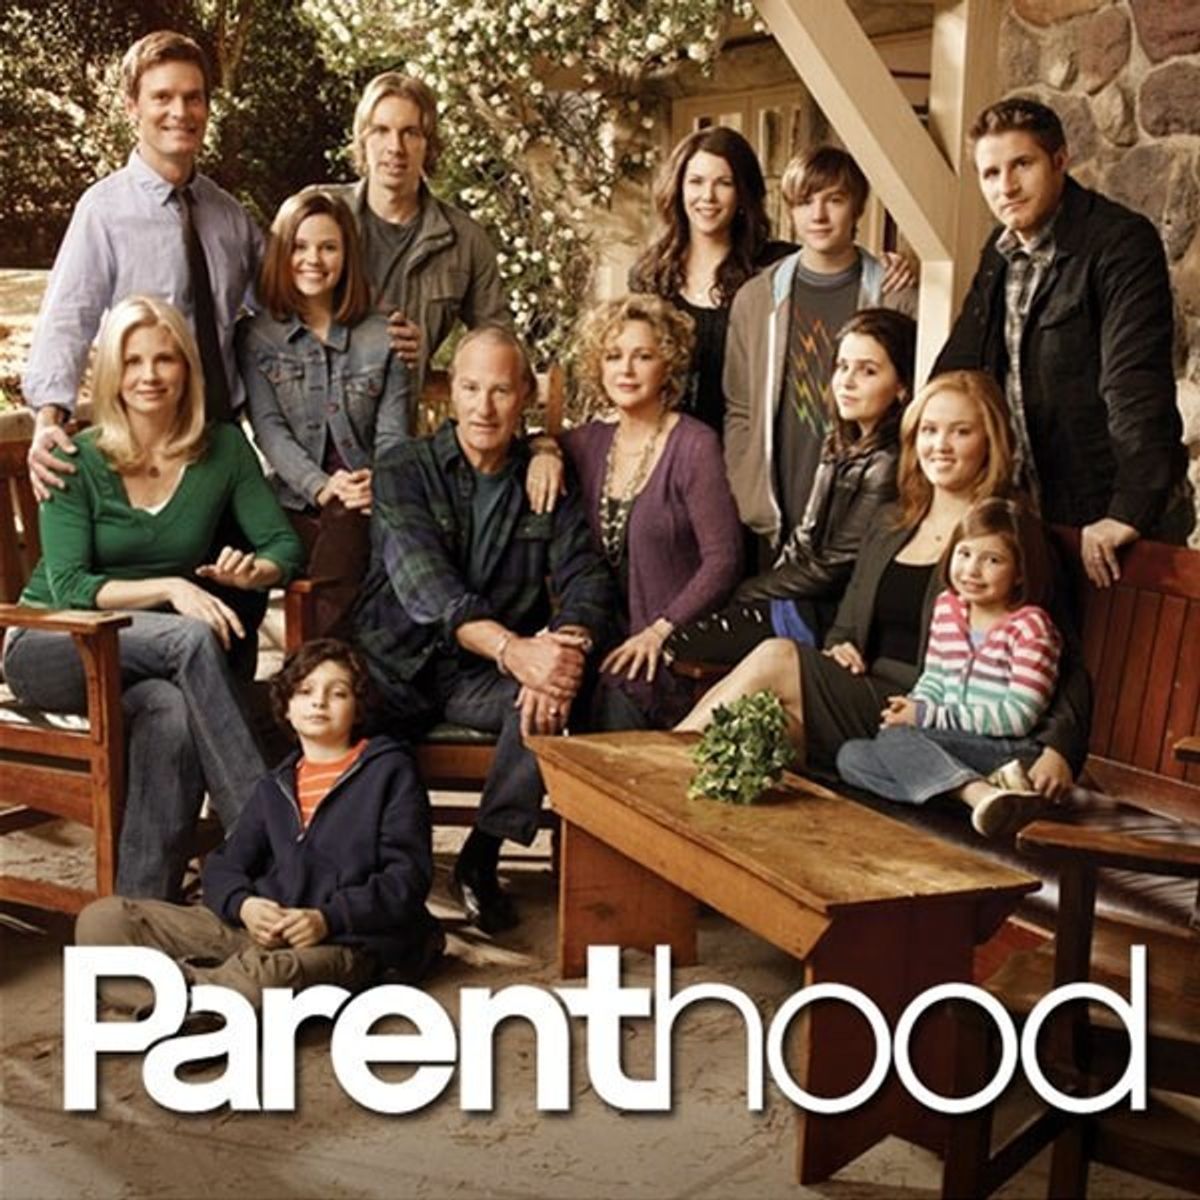 11 Times Parenthood Gave Us All The Feels